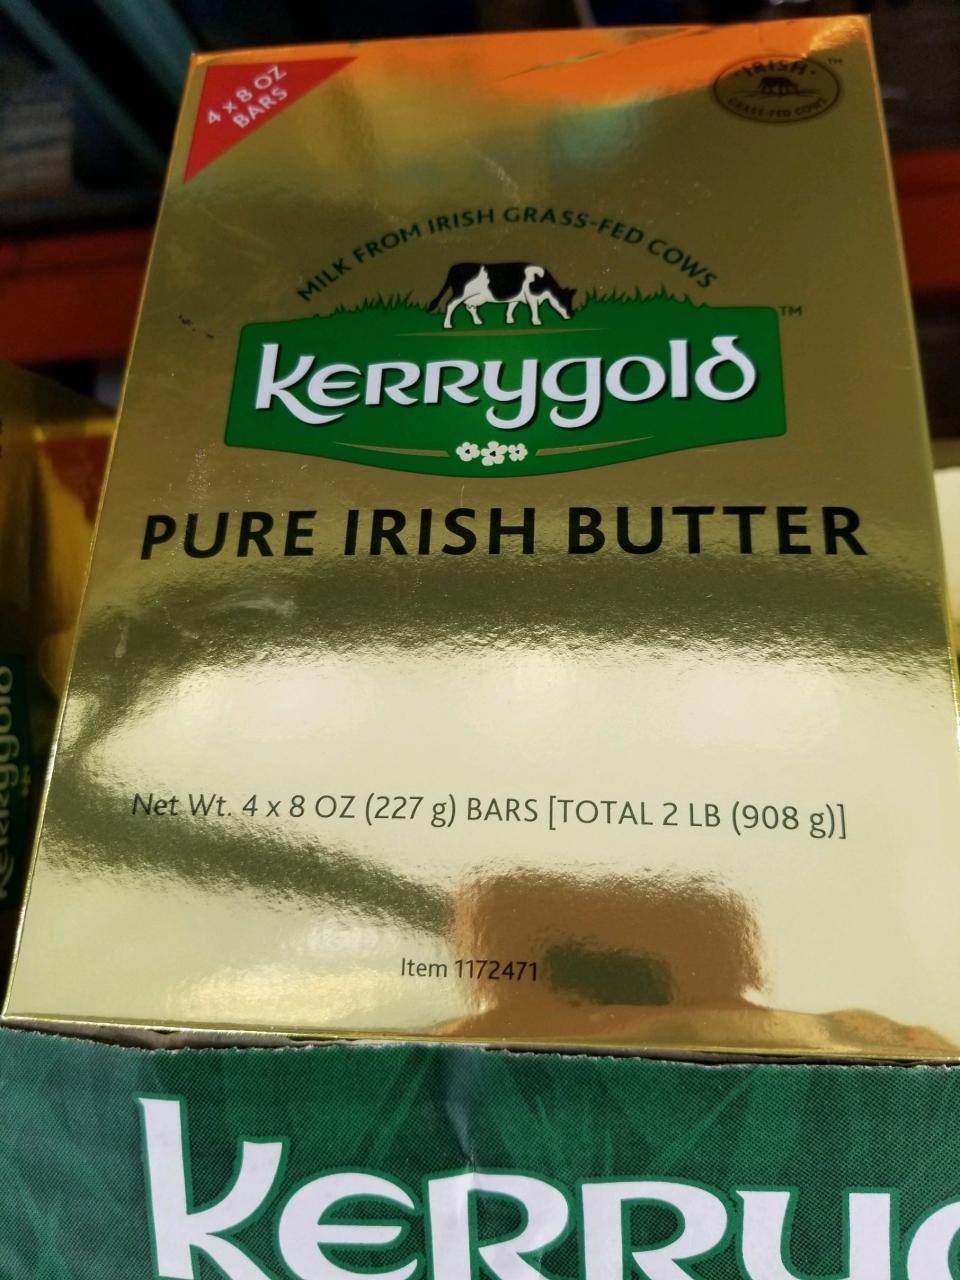 Kerrygold Irish butter from Costco